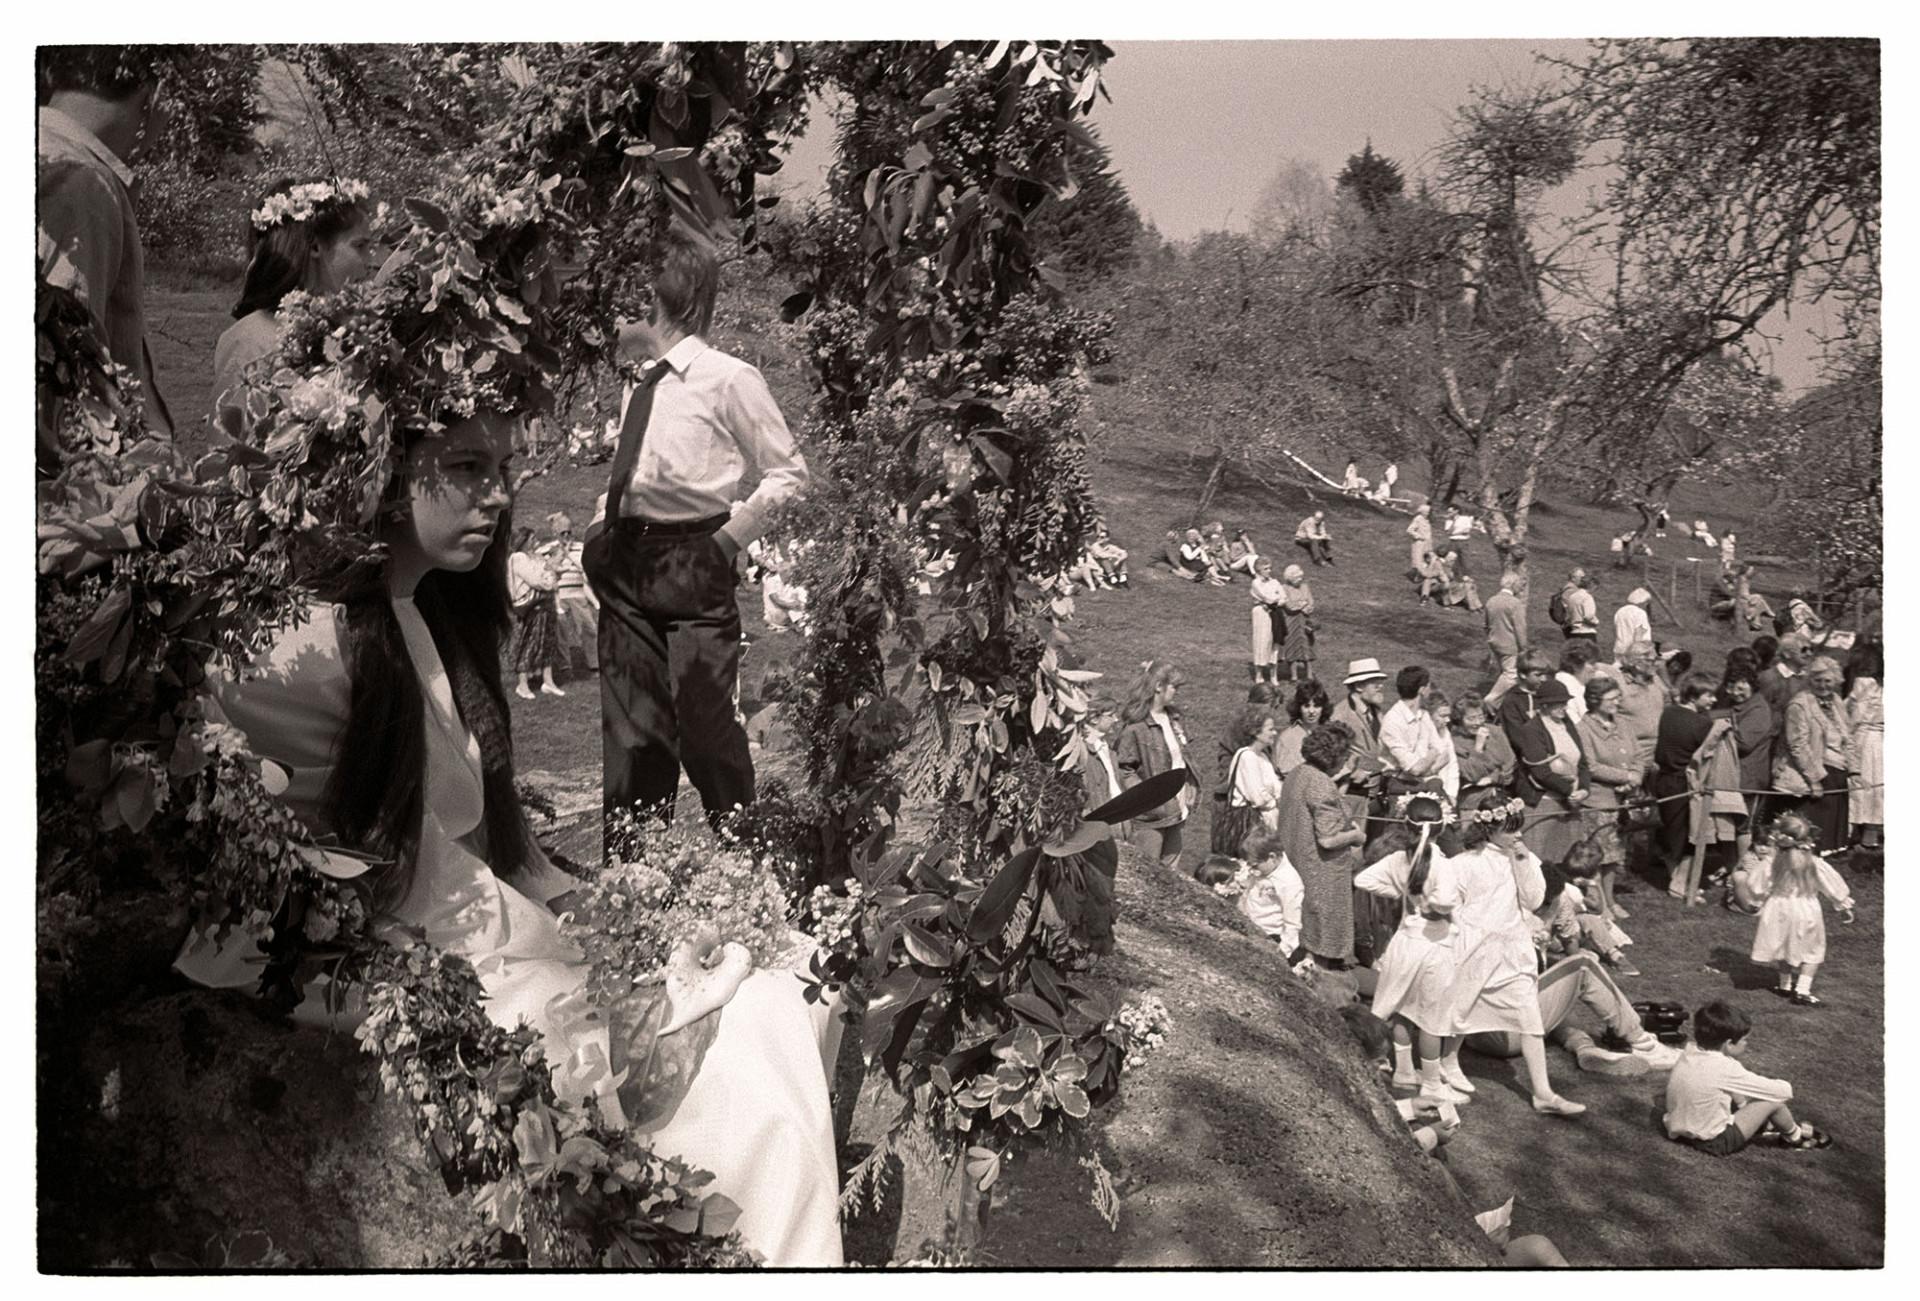 Orchards, May Queen enthroned in flower bower on rock. 
[May fair celebration in an orchard in Lustleigh. The May Queen is sat in a flower bower on a large rock. Spectators are stood and sat in the orchard. Some girls, possibly May Queen attendants, are wearing floral headbands.]